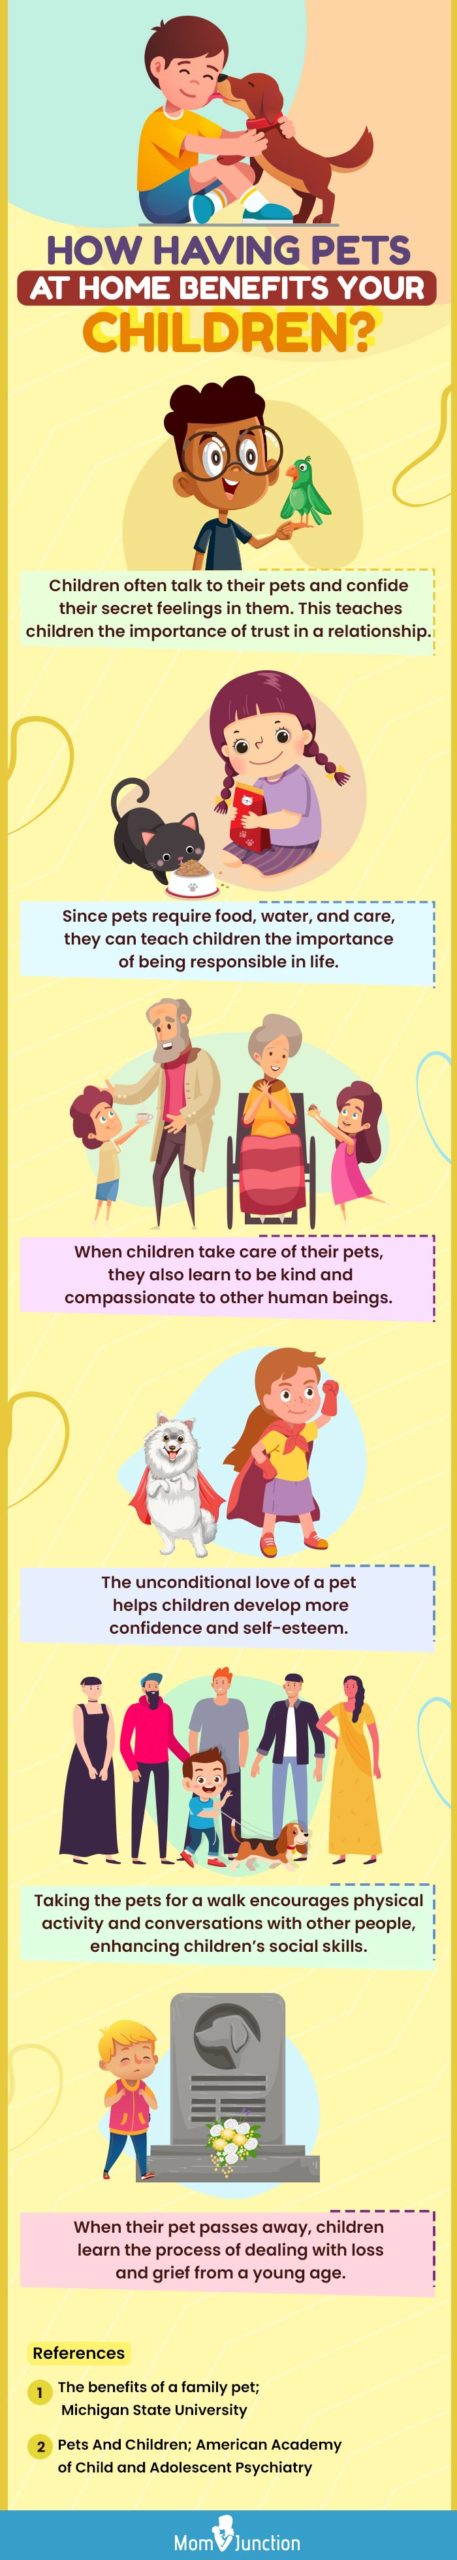 benefits of having pets at home for kids (infographic)